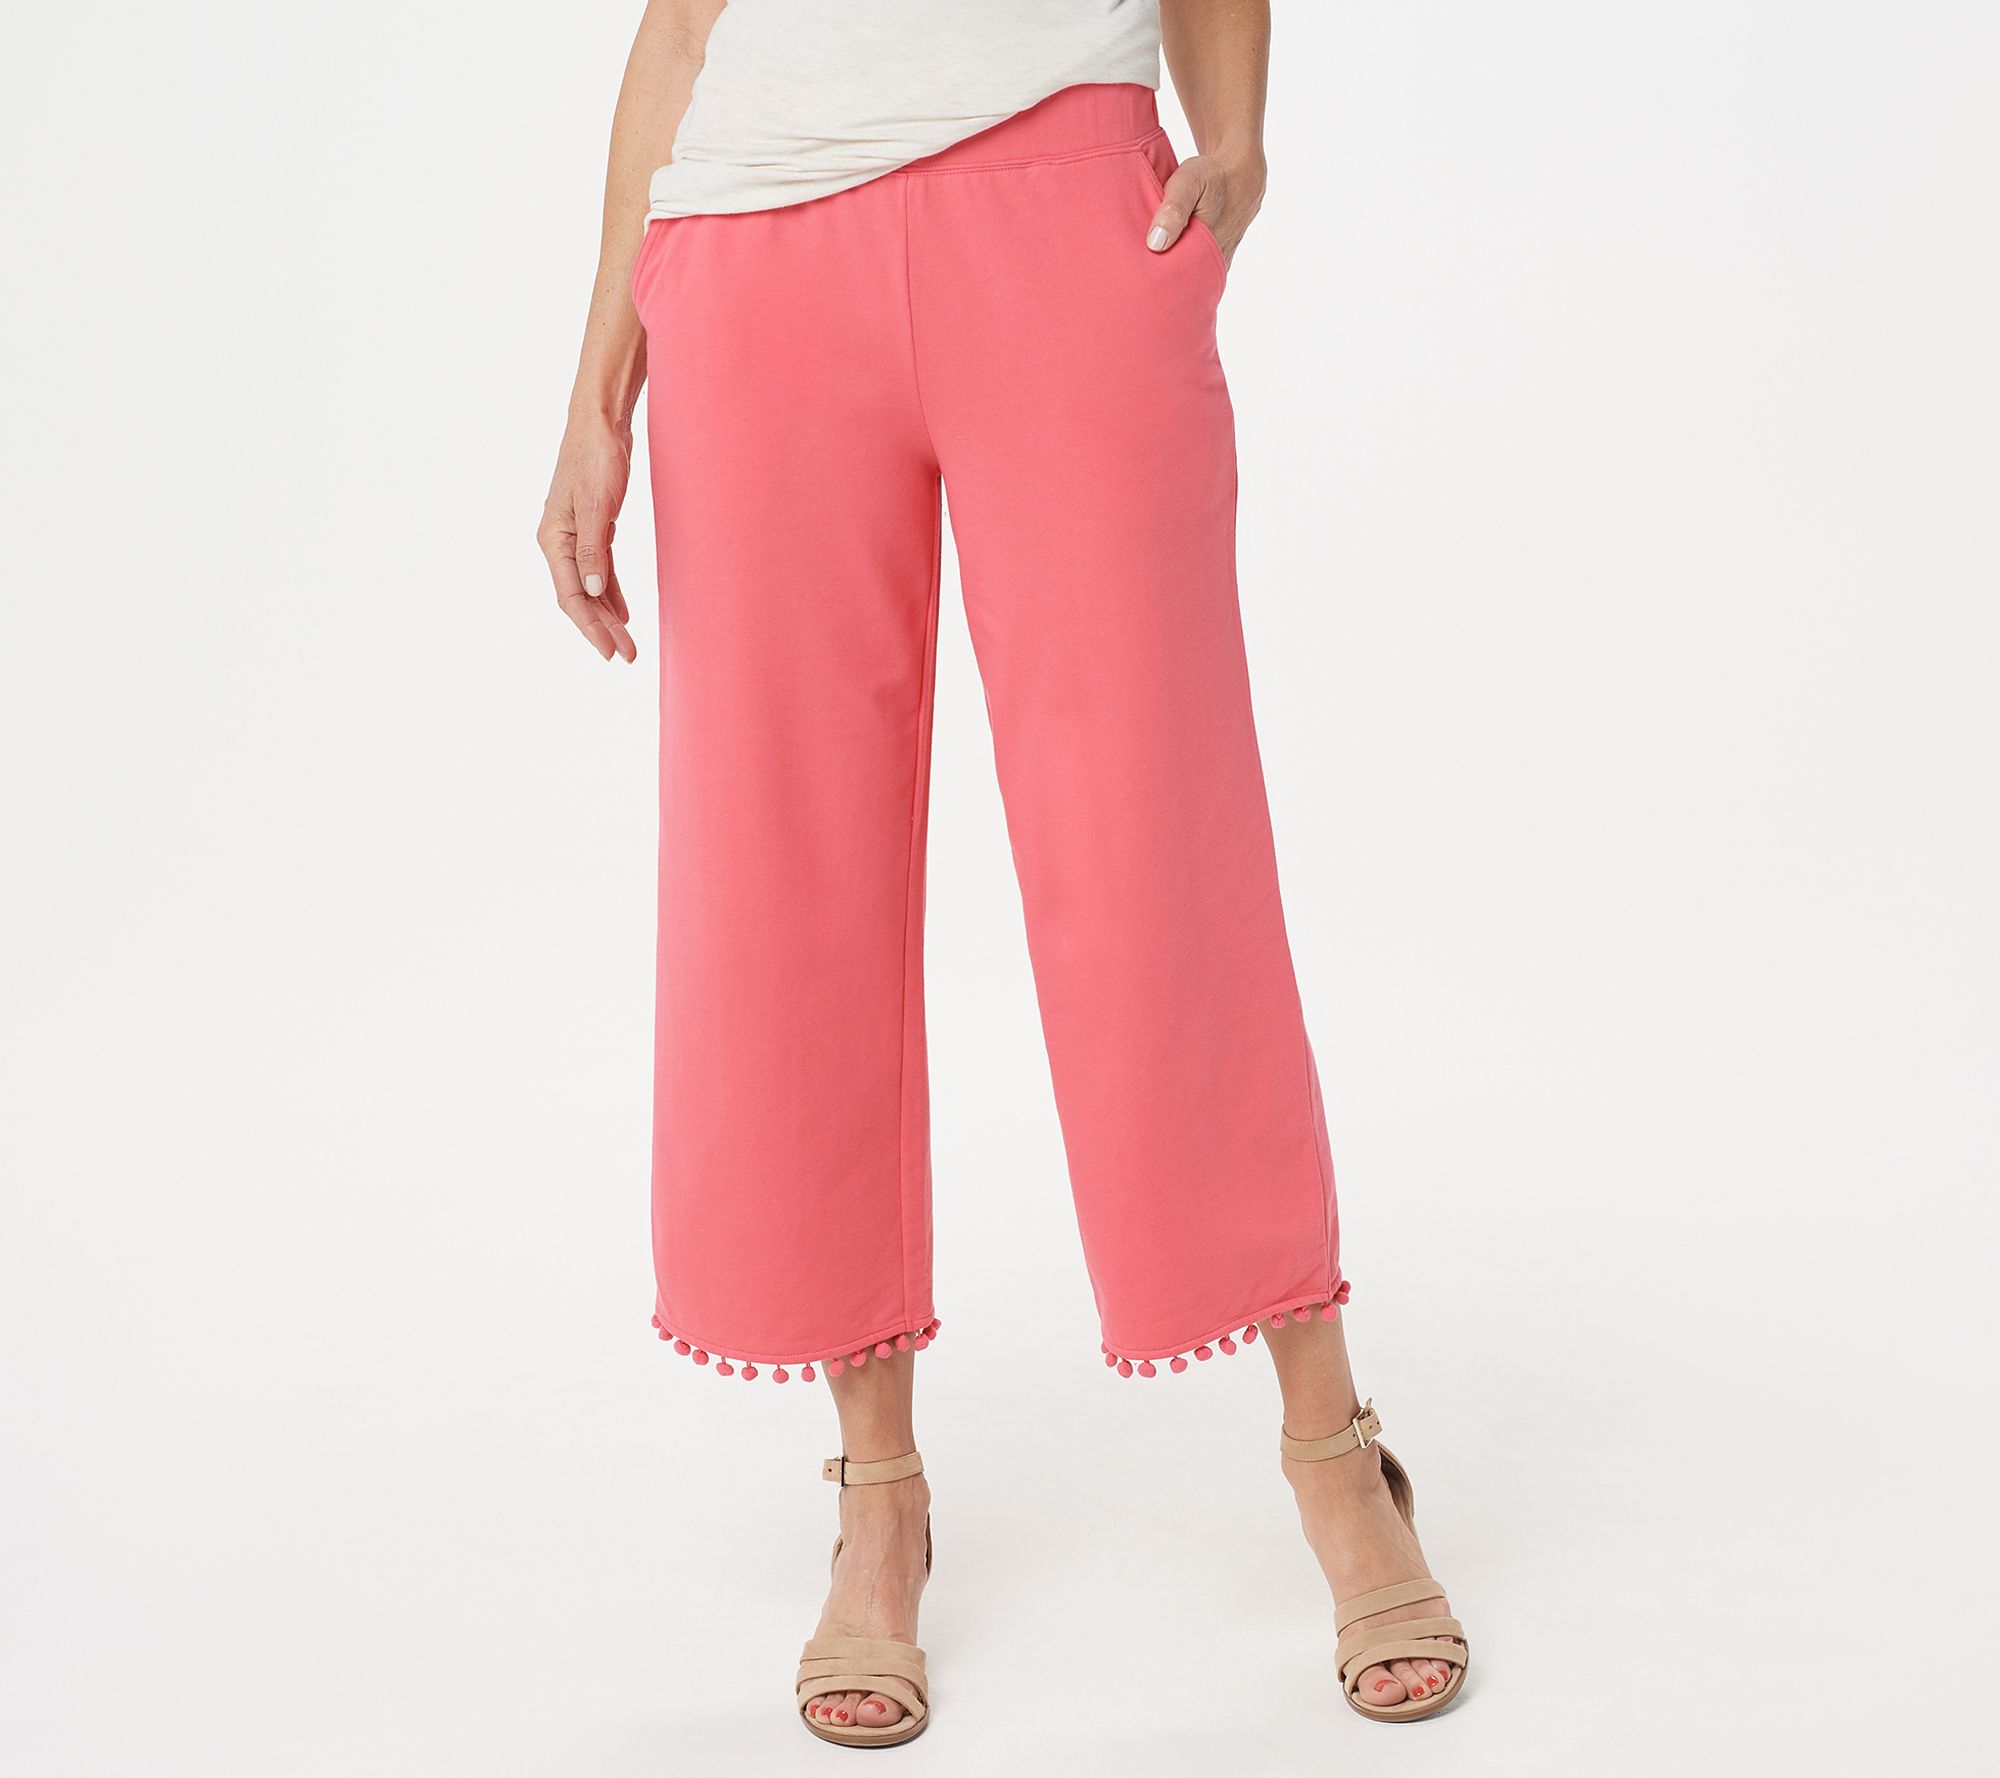 Belle by Kim Gravel French Terry Pom-Pom Cropped Pants - QVC.com